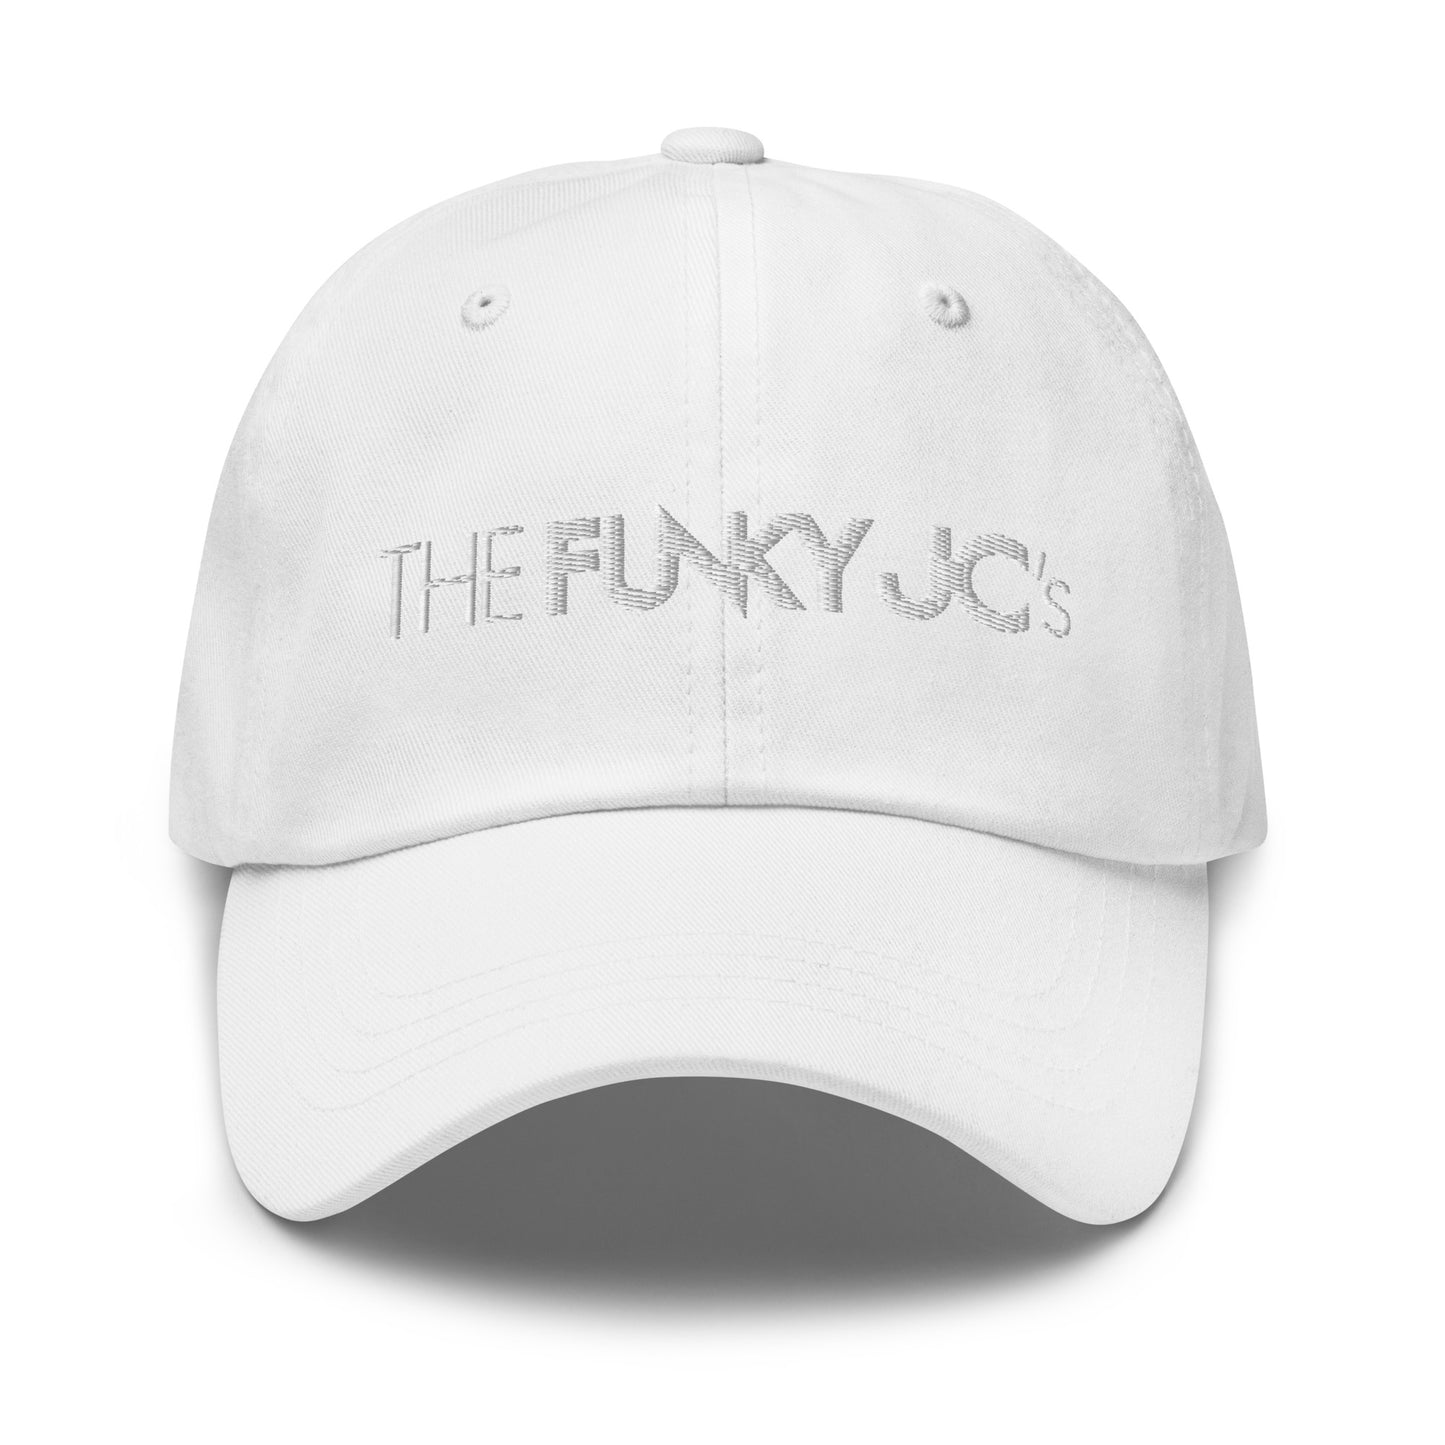 The Funky Jcs Dad hat